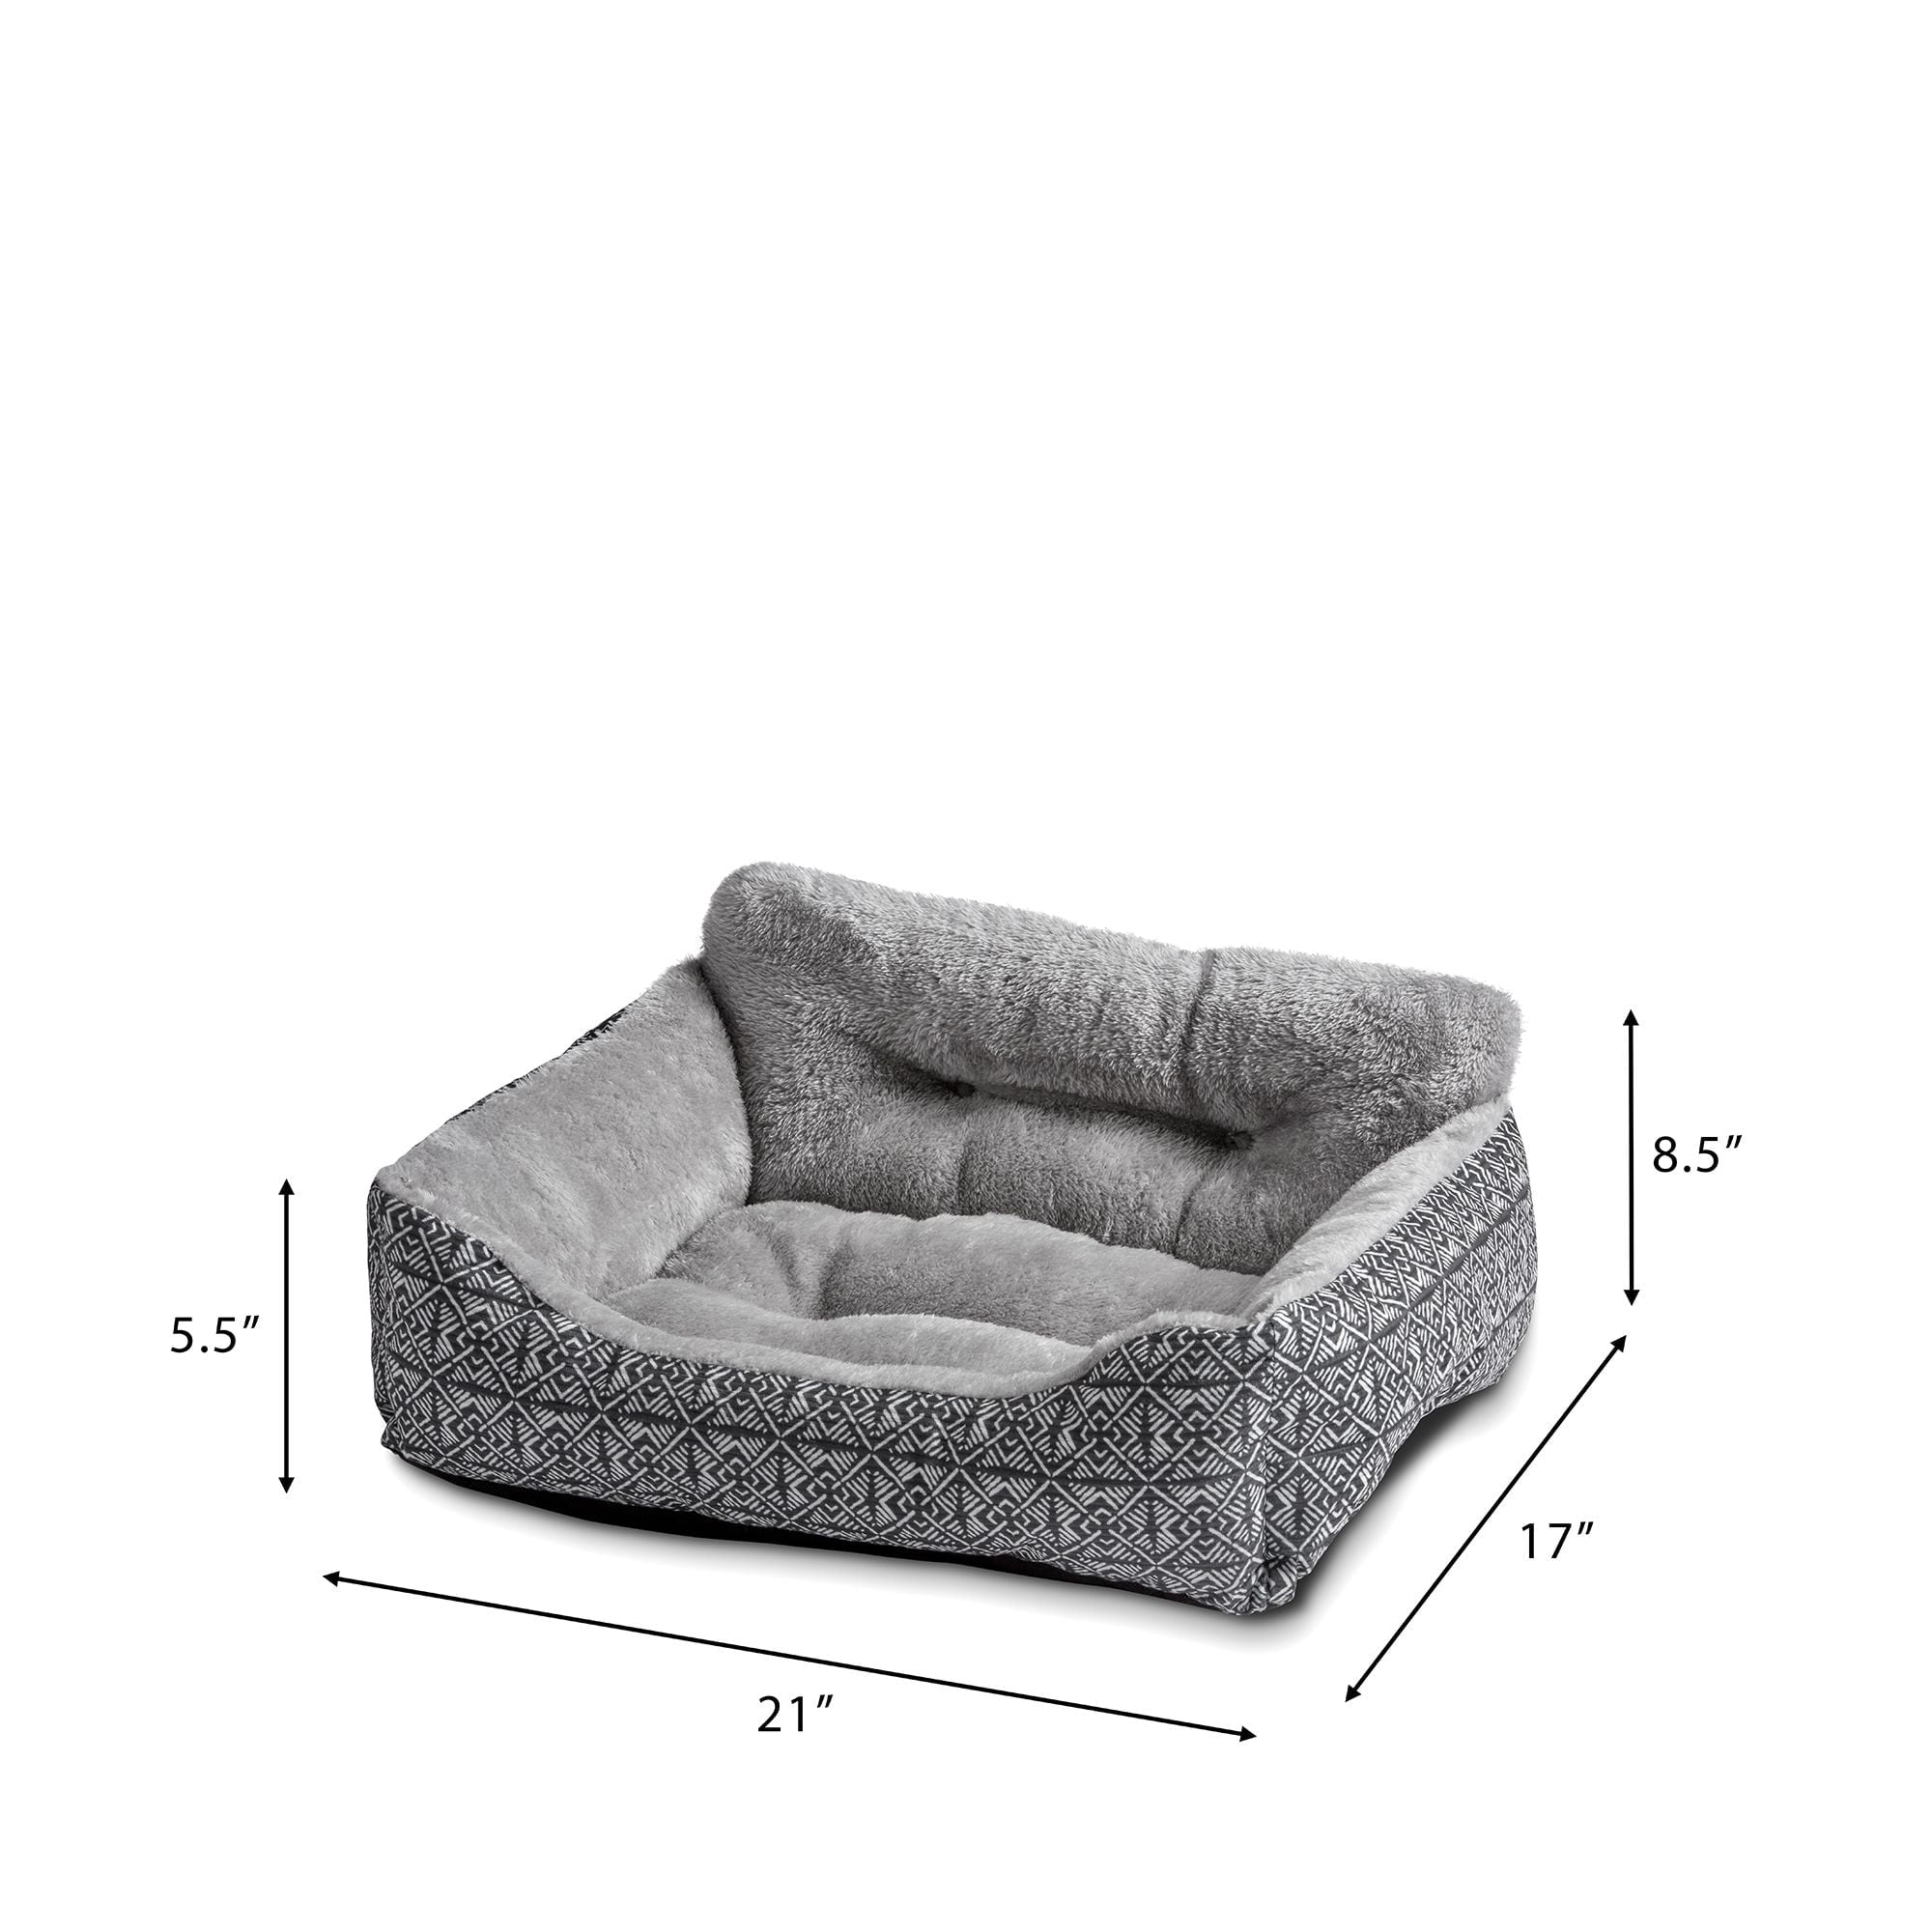 Wholesale prices with free shipping all over United States Vibrant Life Lounger Pet Bed, Small, 21” x 17” - Steven Deals